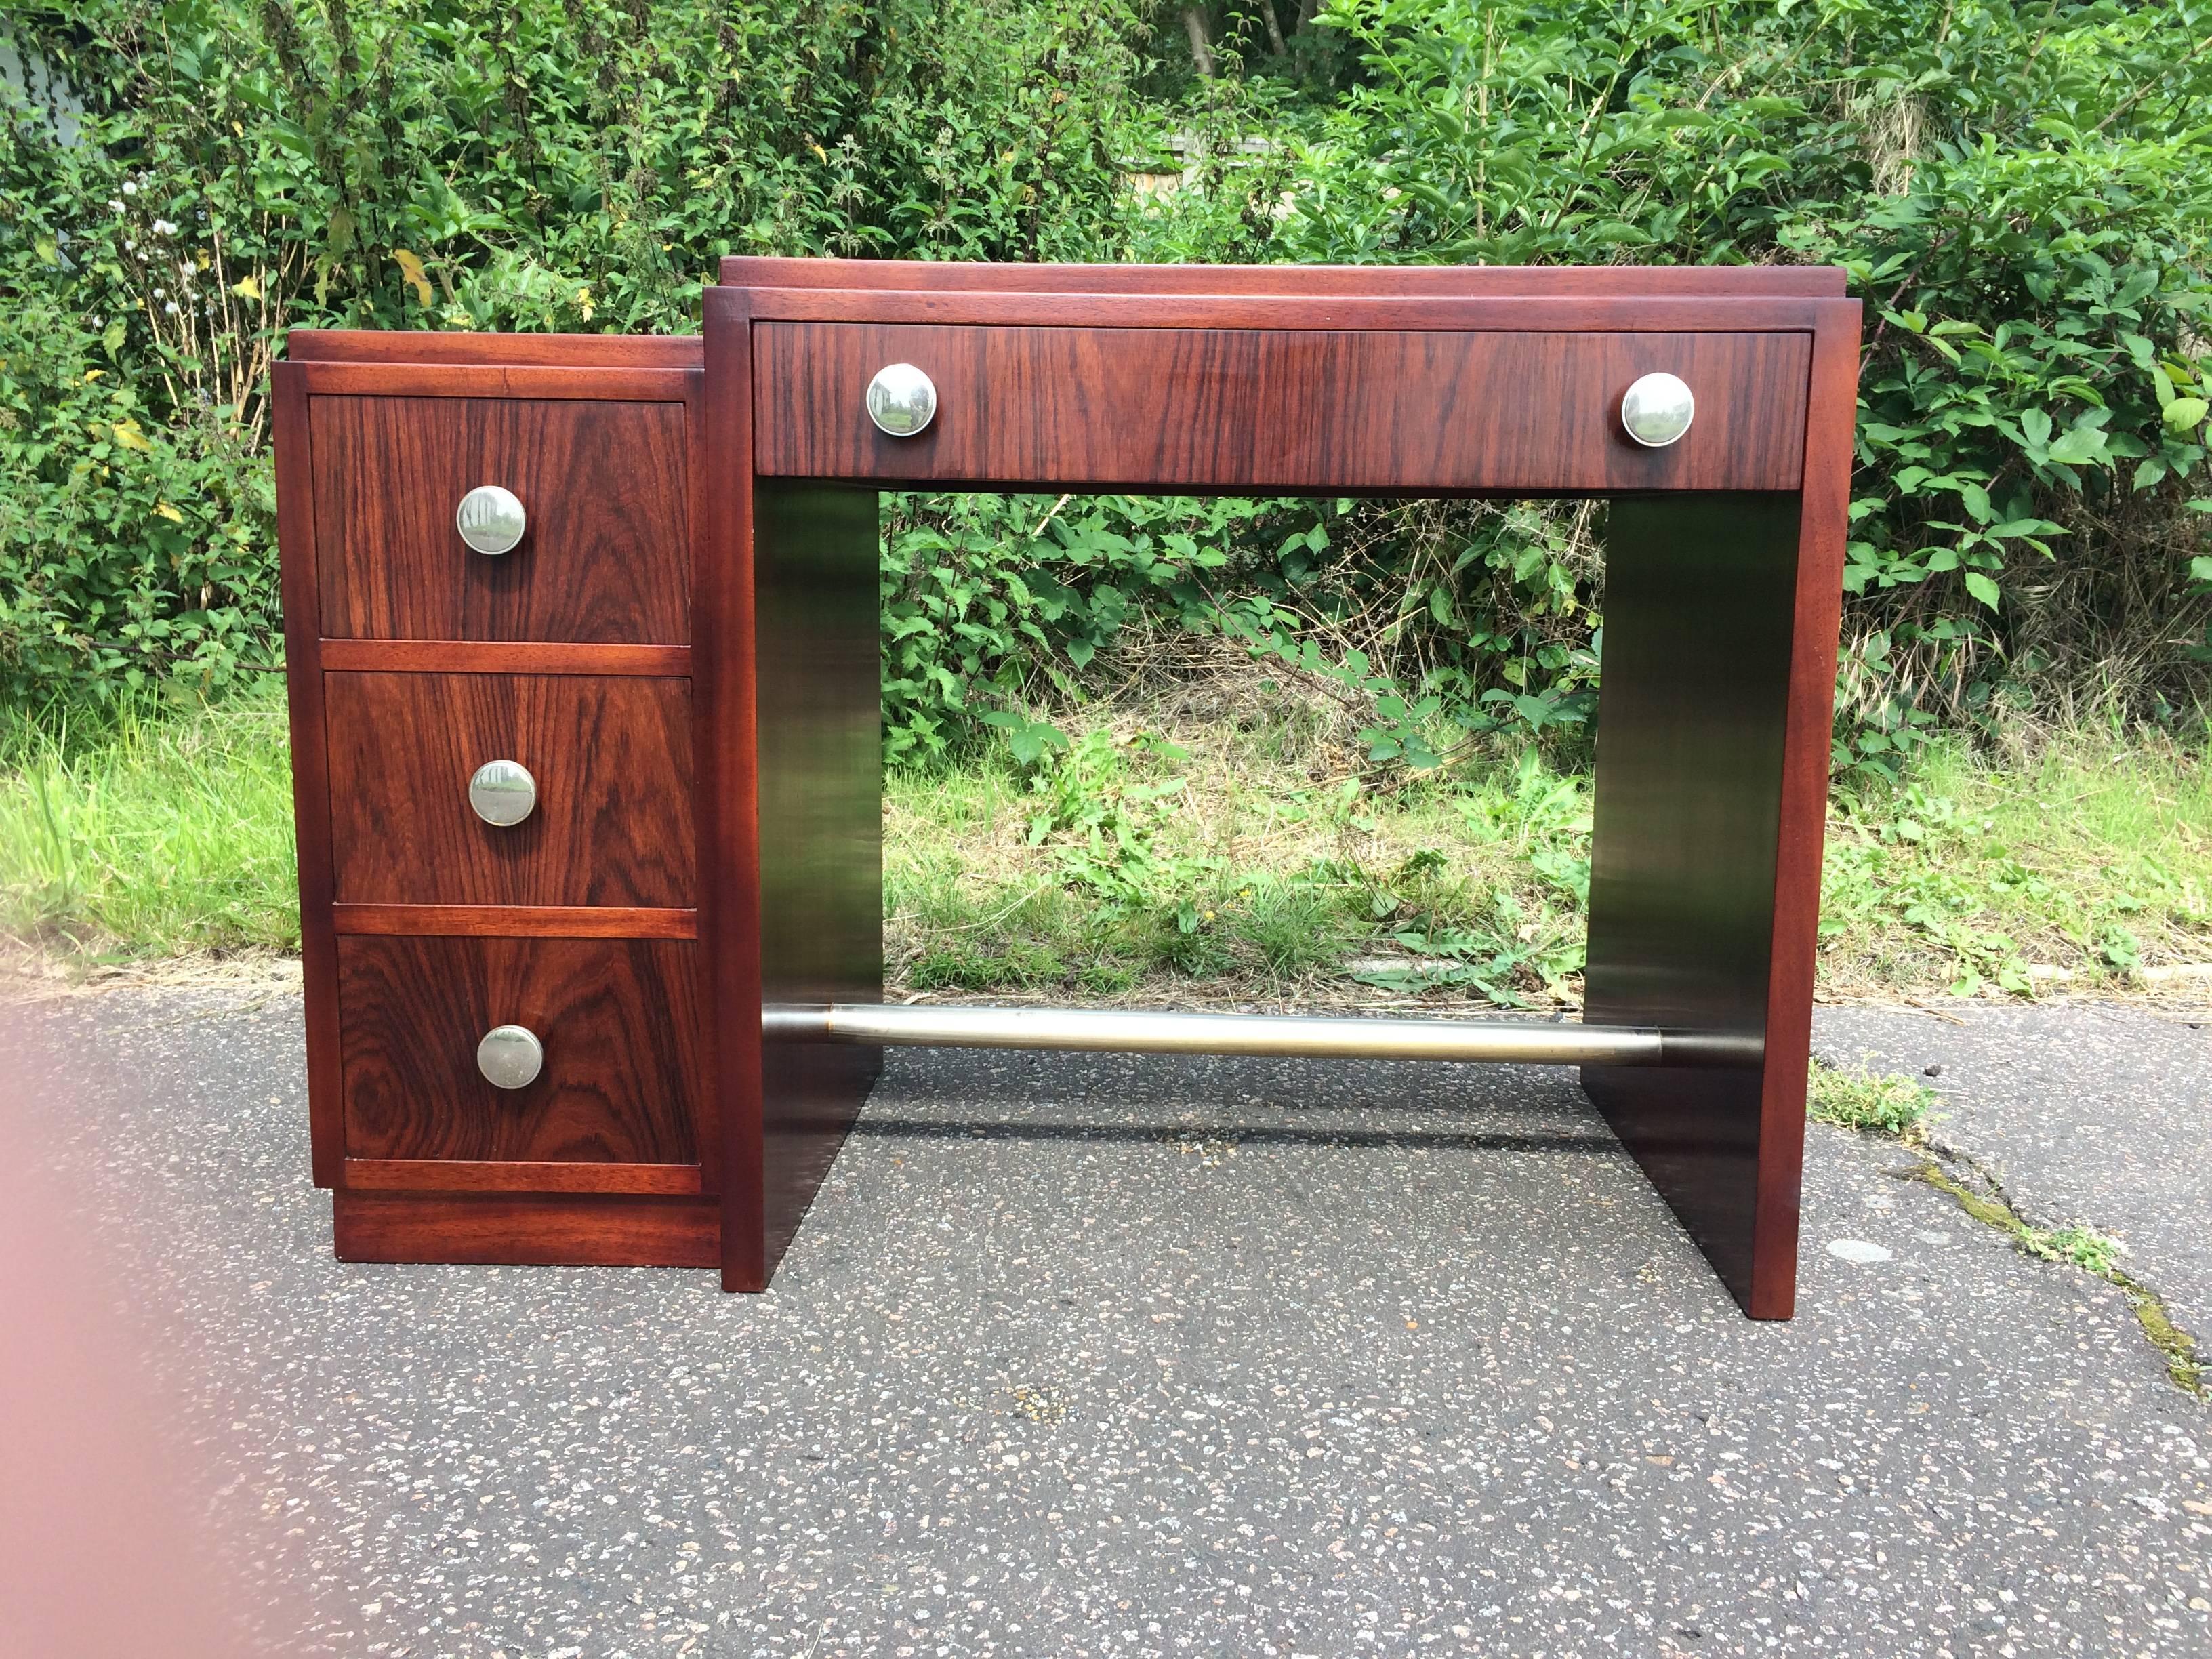 French Rosewood desk with one knee hole drawer and three side drawers. Chrome footrest to the base and silvered bronze drawer handles. Condition is very good as recently renovated. It measures 41.5 inches wide by 21.5 inches deep by 28 inches high